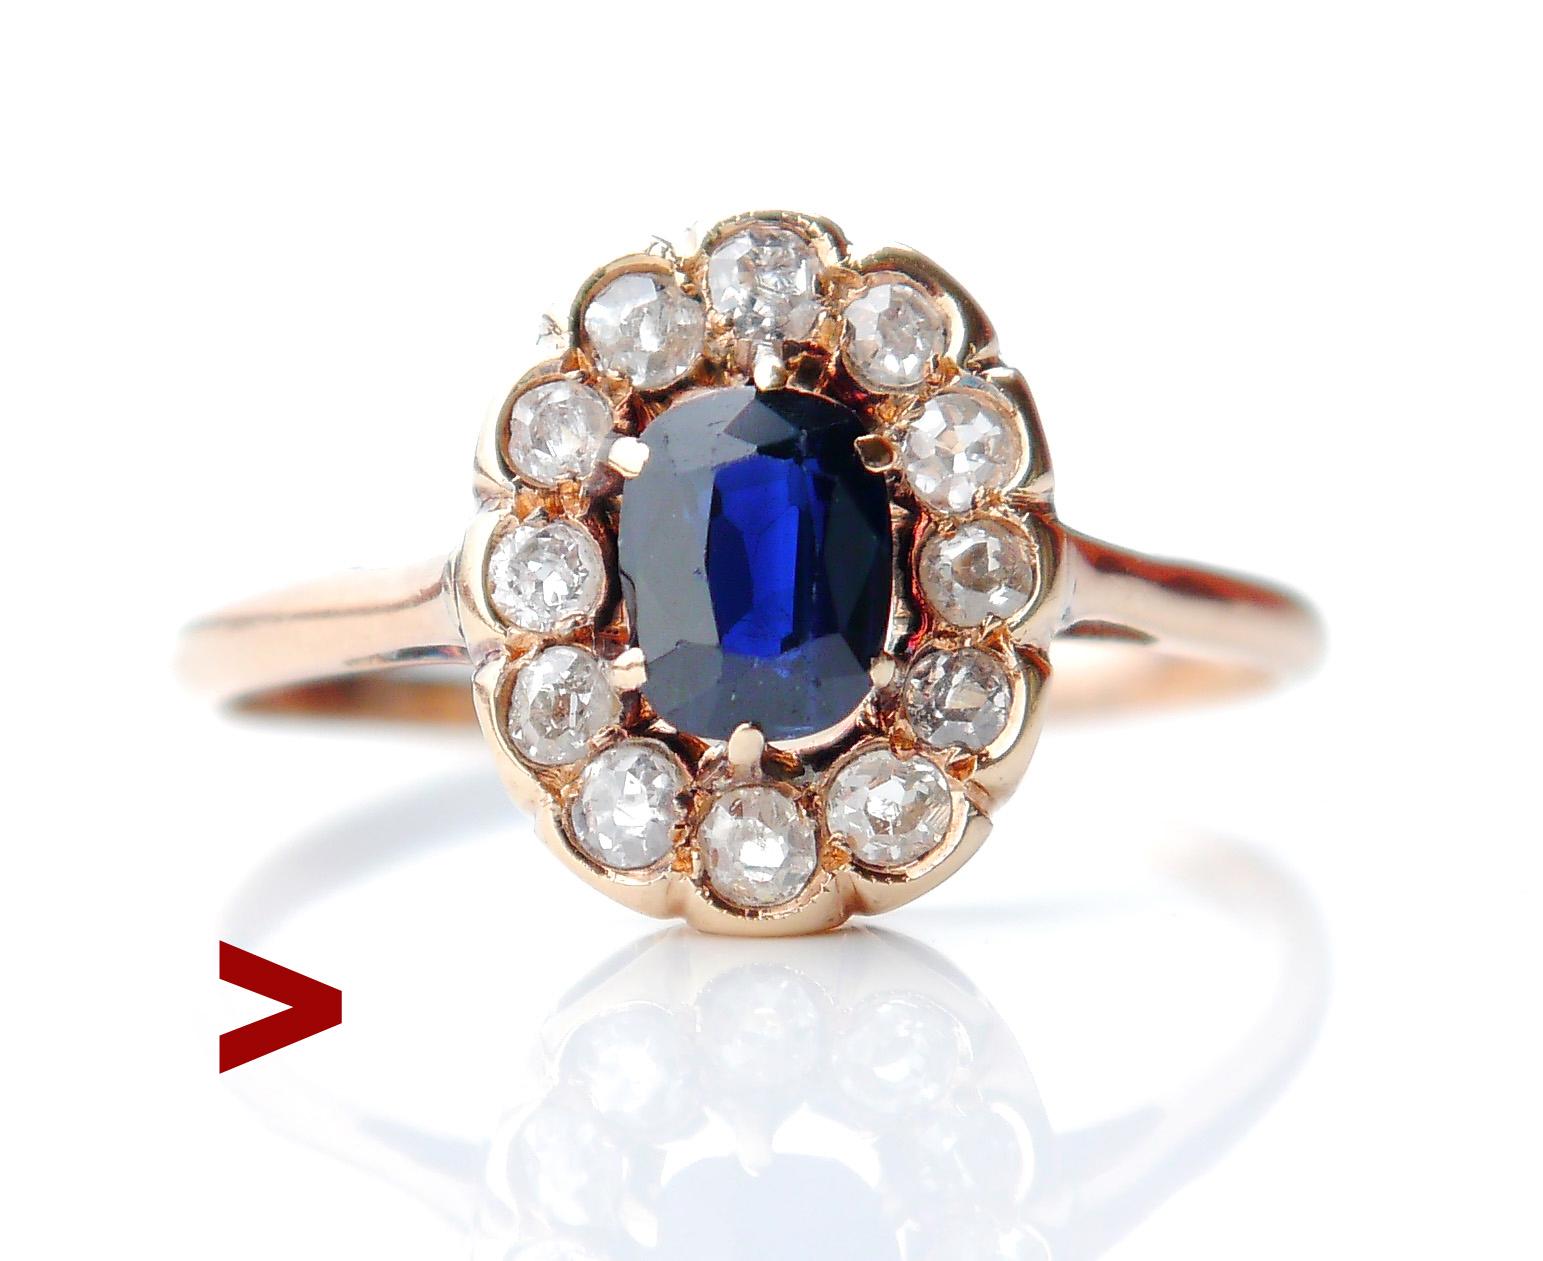 Beautiful at least century old Halo Ring in solid 14K Yellow Gold with natural and untreated Greenish Blue Sapphire and 12 old European cut Diamonds. No Silver, White Gold or Platinum around Diamonds in this design.

European or Russian,ca. early XX